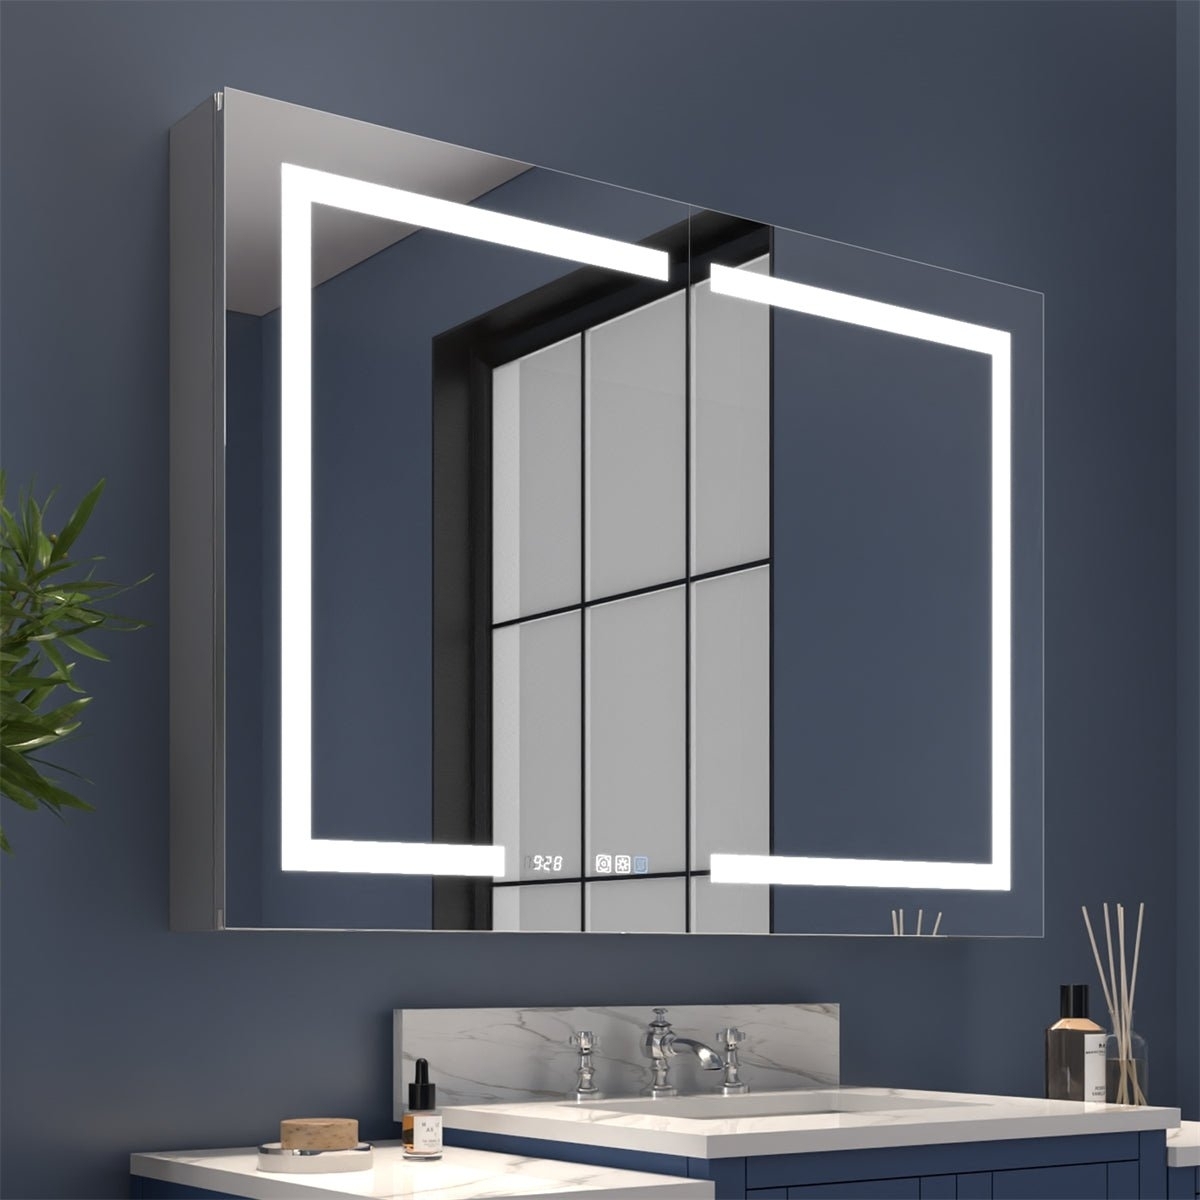 Boost-M2 44 W X 32 H Bathroom Light Medicine Cabinets With Vanity Mirror Recessed Or Surface